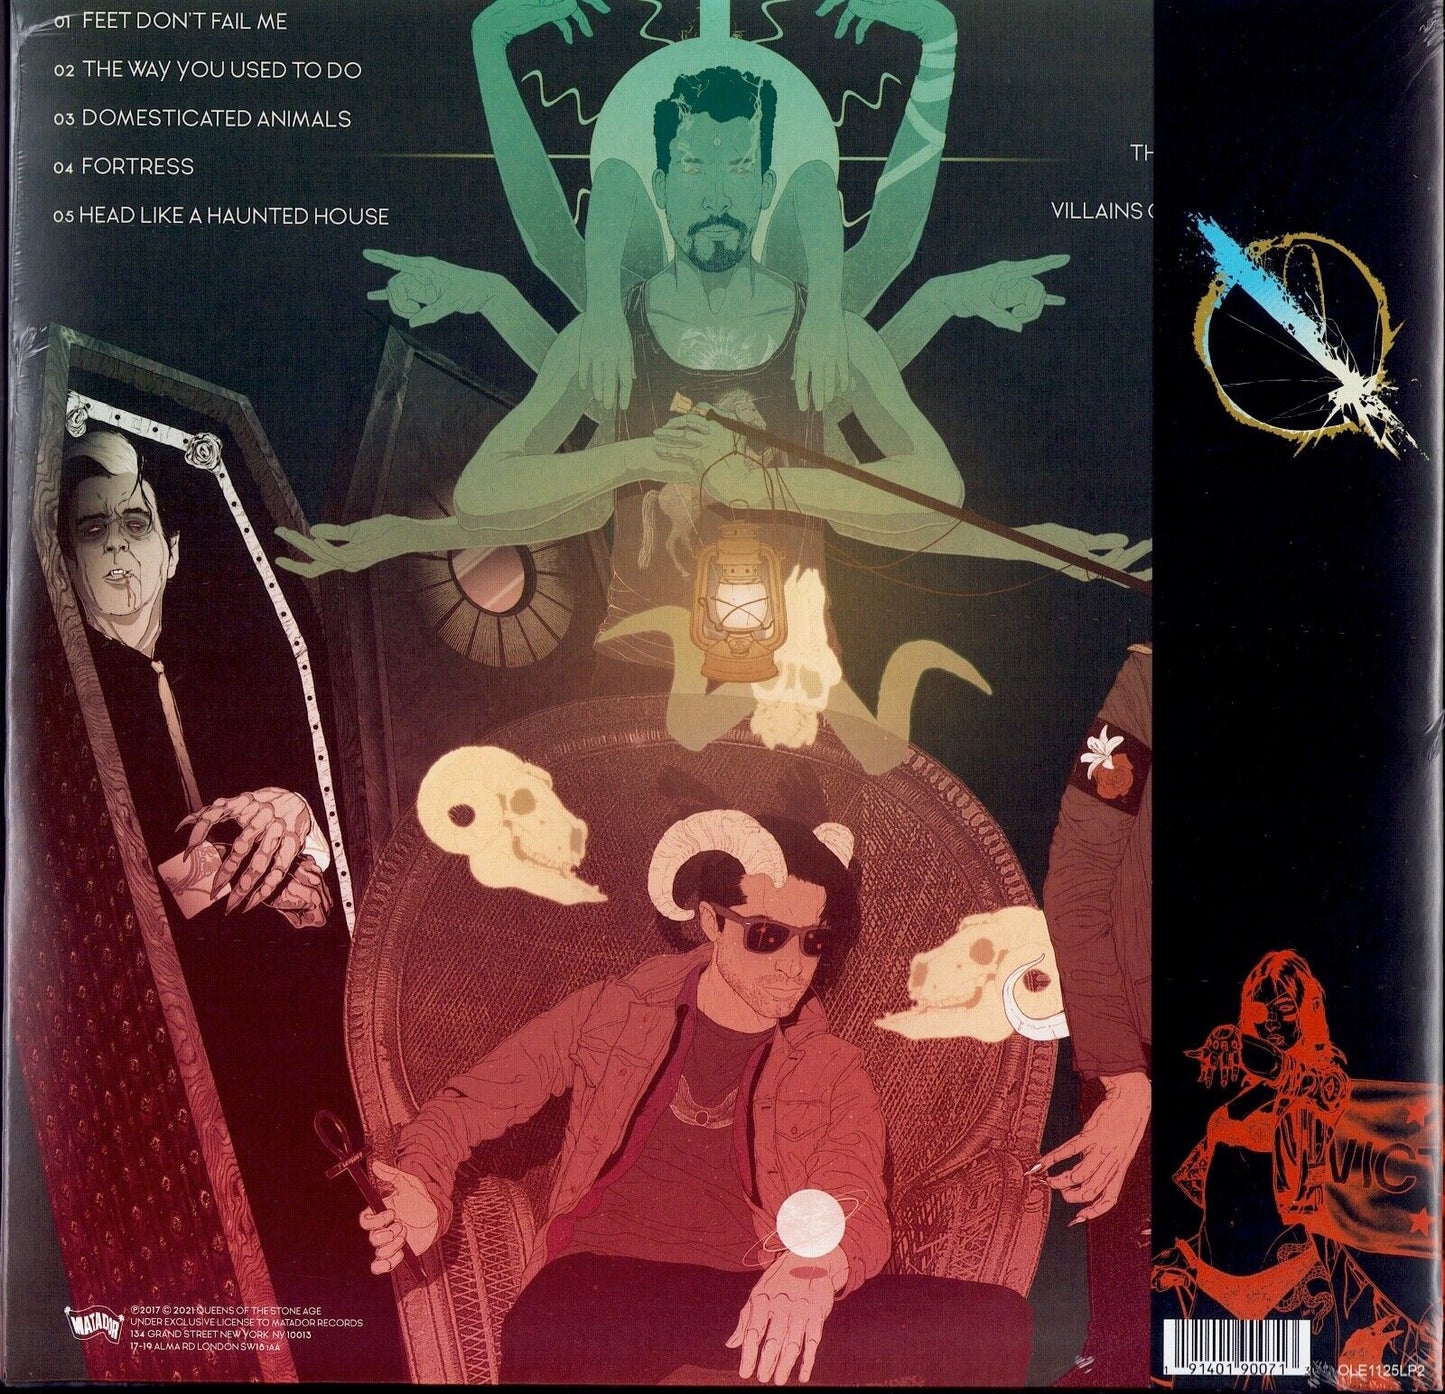 Queens Of The Stone Age ‎- Villains White Vinyl 2LP Limited Edition